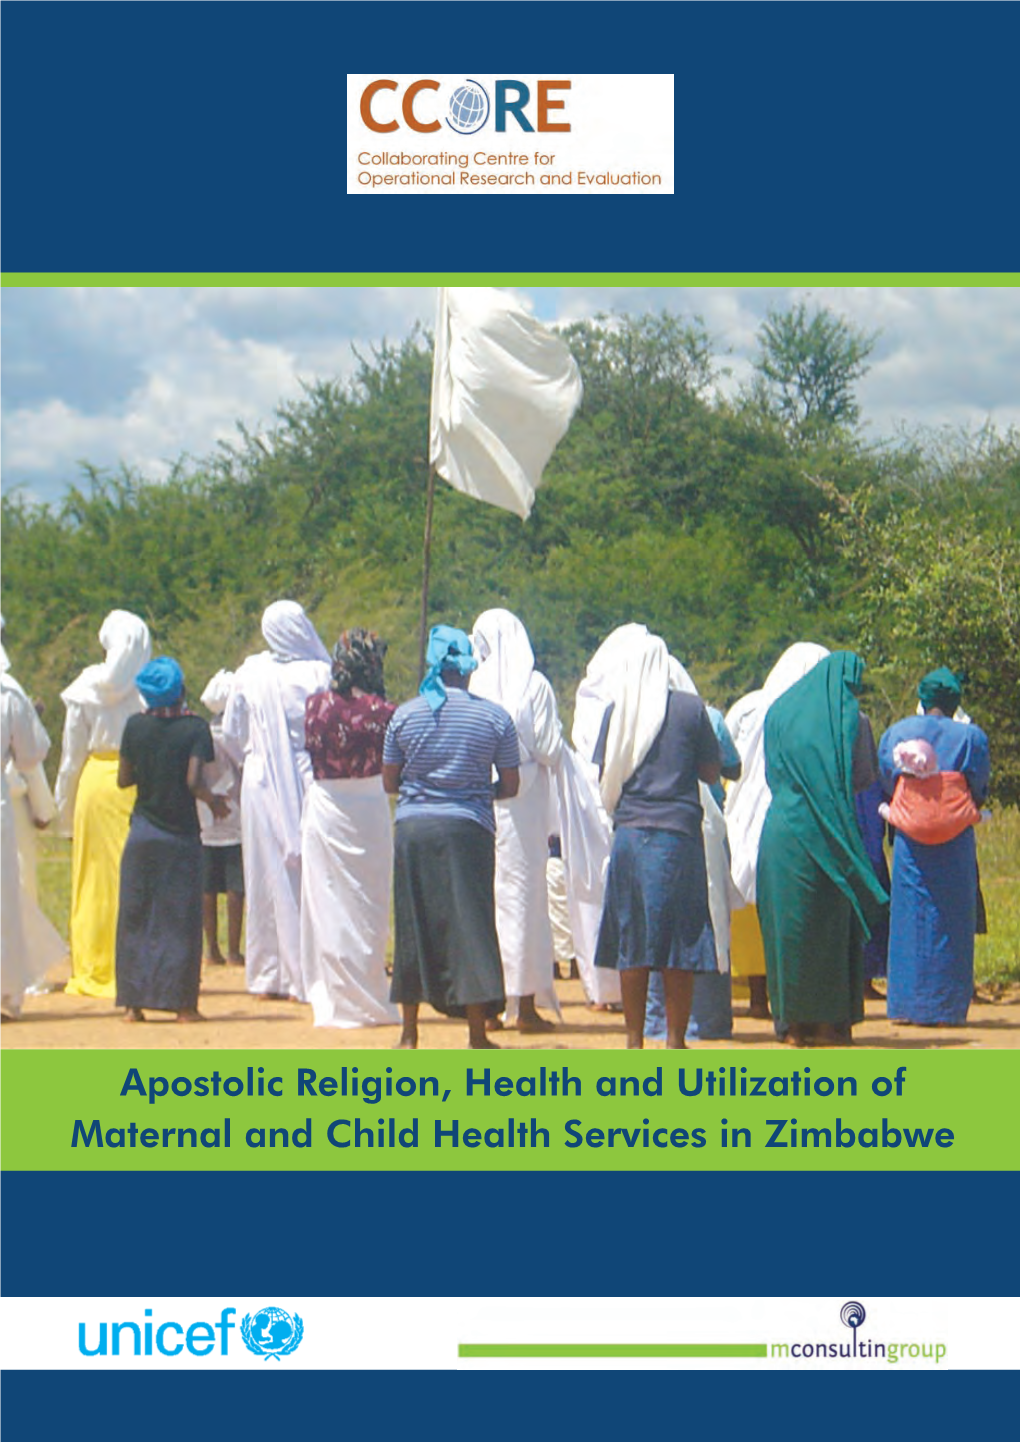 Apostolic Religion, Health and Utilization of Maternal and Child Health Services in Zimbabwe Project Leader and Consultant: Dr